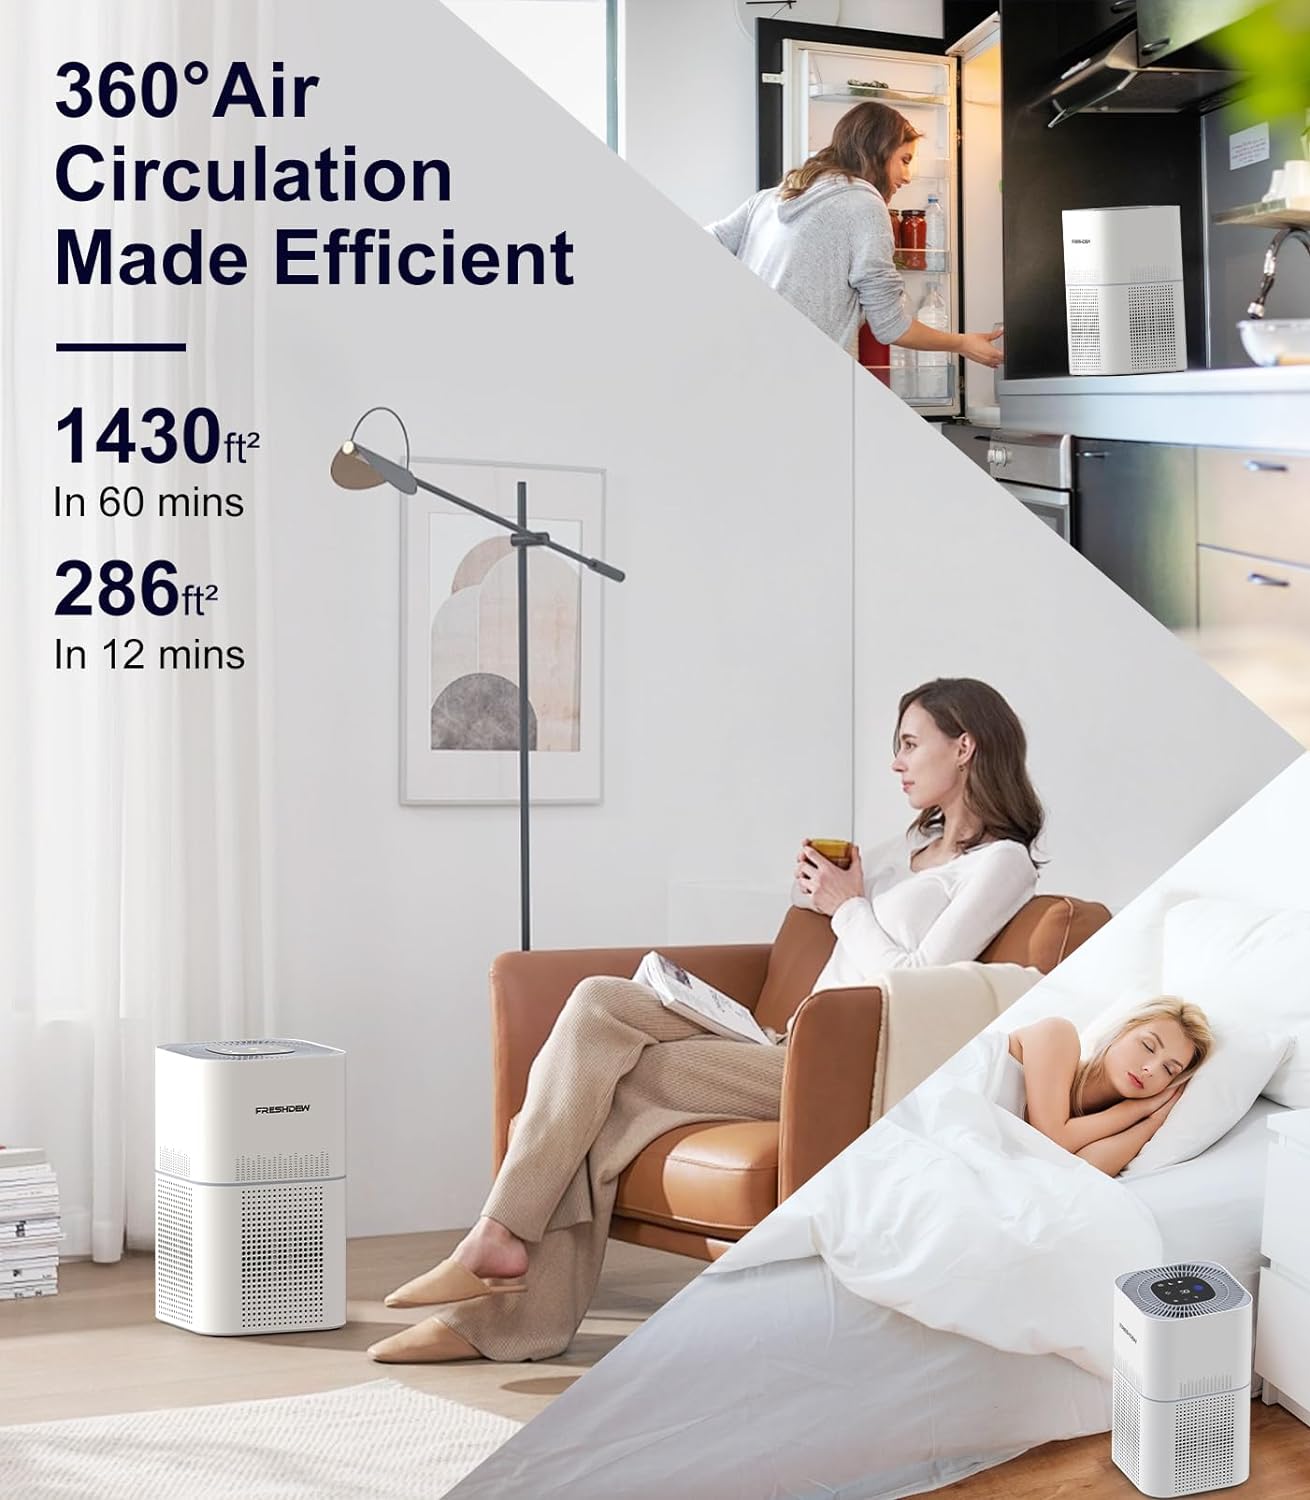 Smart Wi - Fi Air Purifier for Bedroom, FRESHDEW CADR 300 m³/h H13 True HEPA Filter with Air Quality Sensor, Pet Air Purifiers for Home up to 100m², Air Cleaner for Pets, Smoke, Dust, Works with Alexa - Amazing Gadgets Outlet